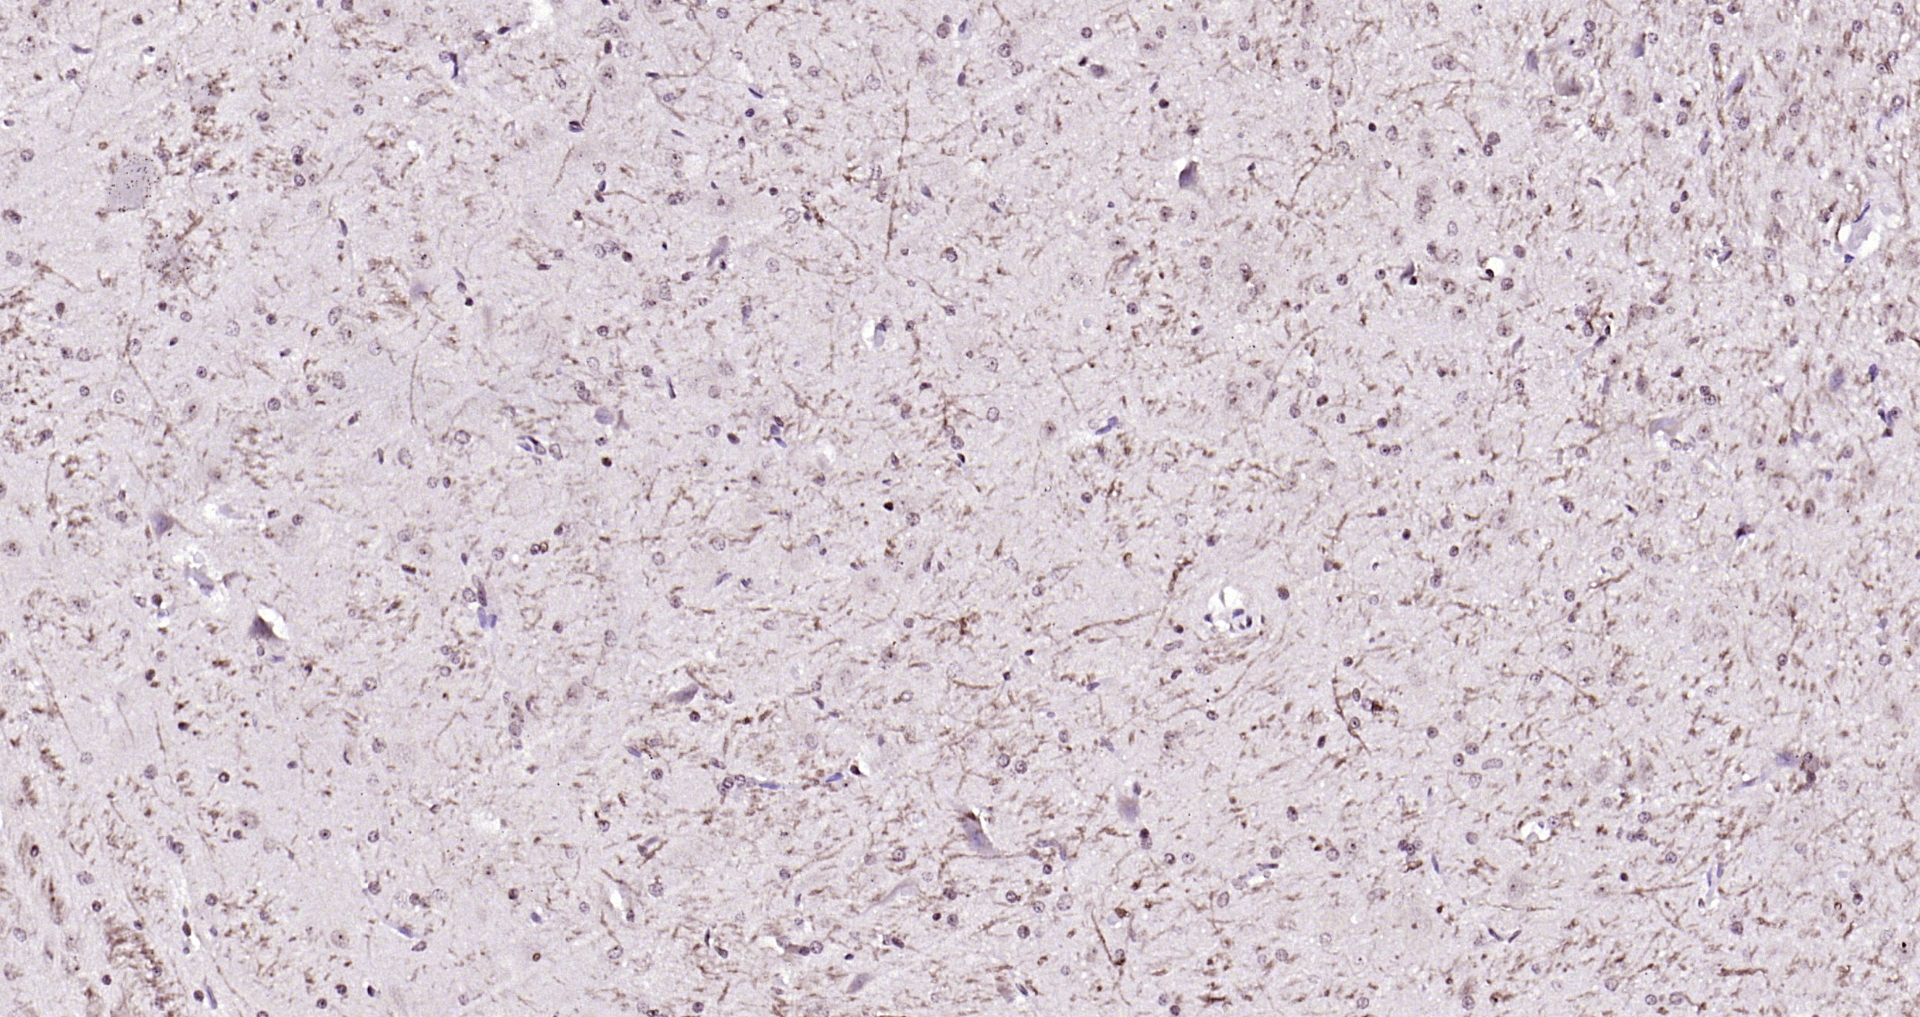 Paraformaldehyde-fixed, paraffin embedded Rat brain; Antigen retrieval by boiling in sodium citrate buffer (pH6.0) for 15min; Block endogenous peroxidase by 3% hydrogen peroxide for 20 minutes; Blocking buffer (normal goat serum) at 37°C for 30min; Antibody incubation with Notch1/MOTC Polyclonal Antibody, Unconjugated (bs-1335R) at 1:200 overnight at 4°C, DAB staining.